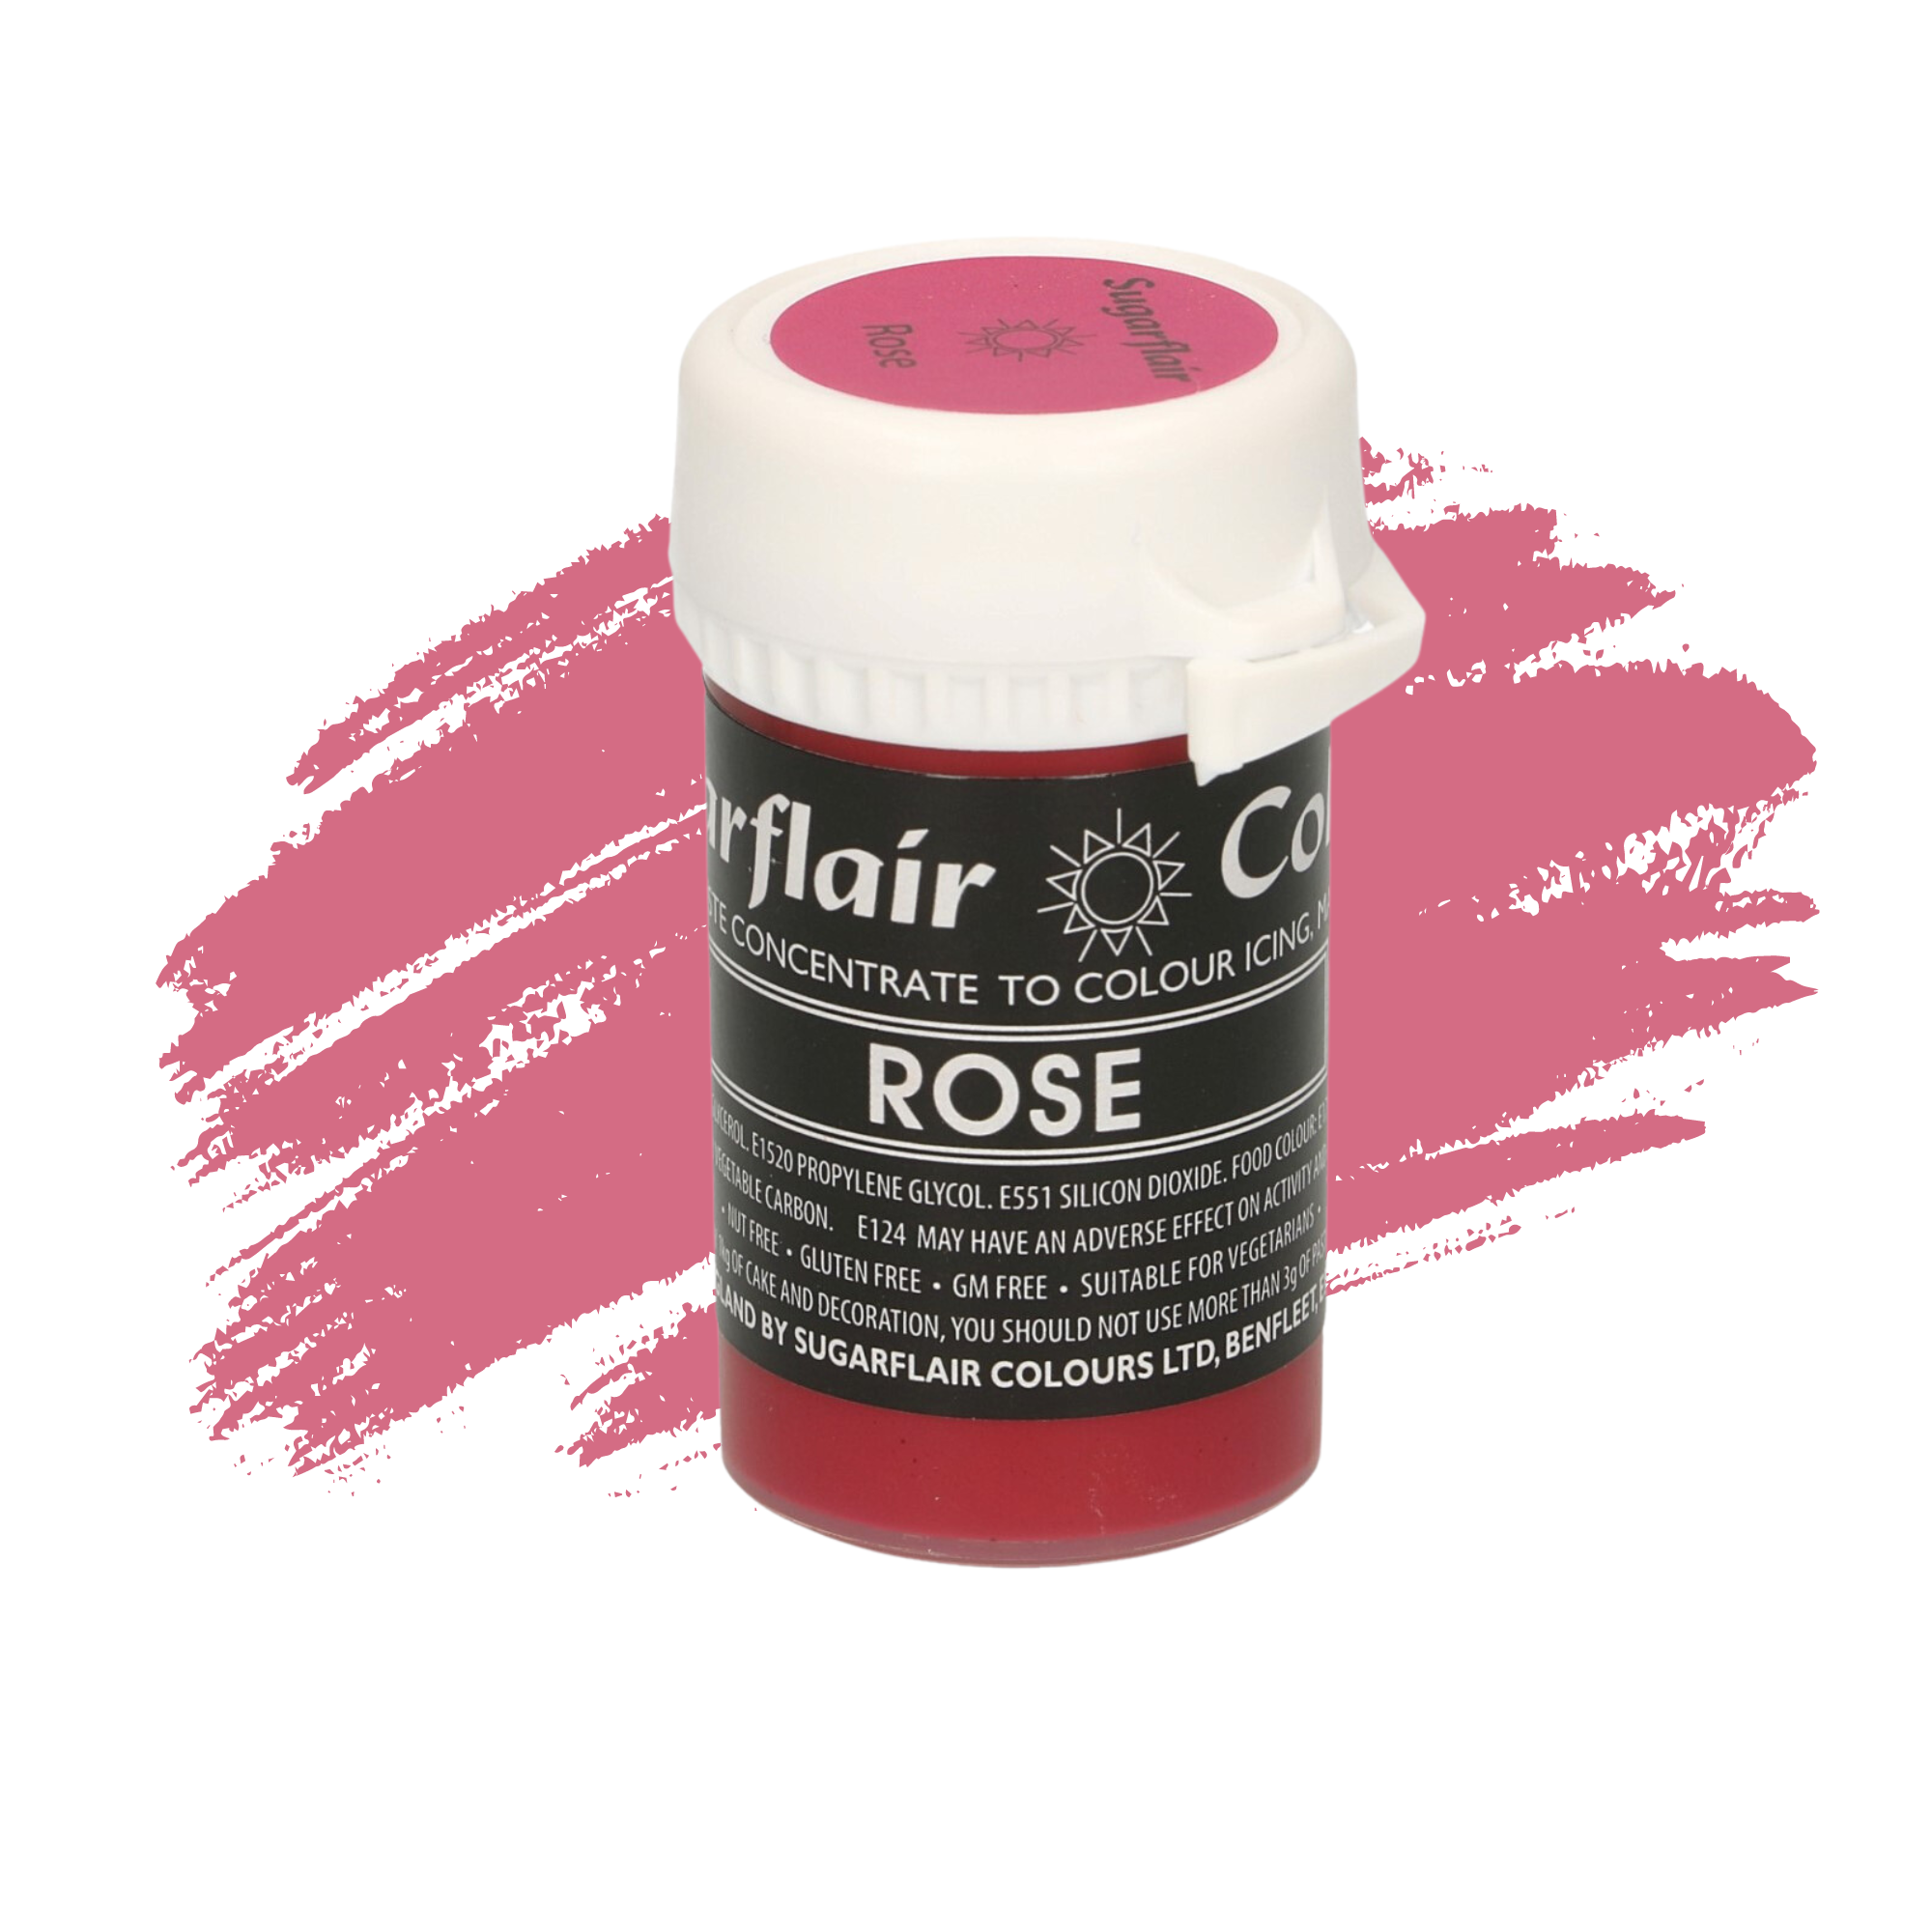 Sugarflair Paste Colours Concentrated Food Colouring - Pastel Rose - 25g